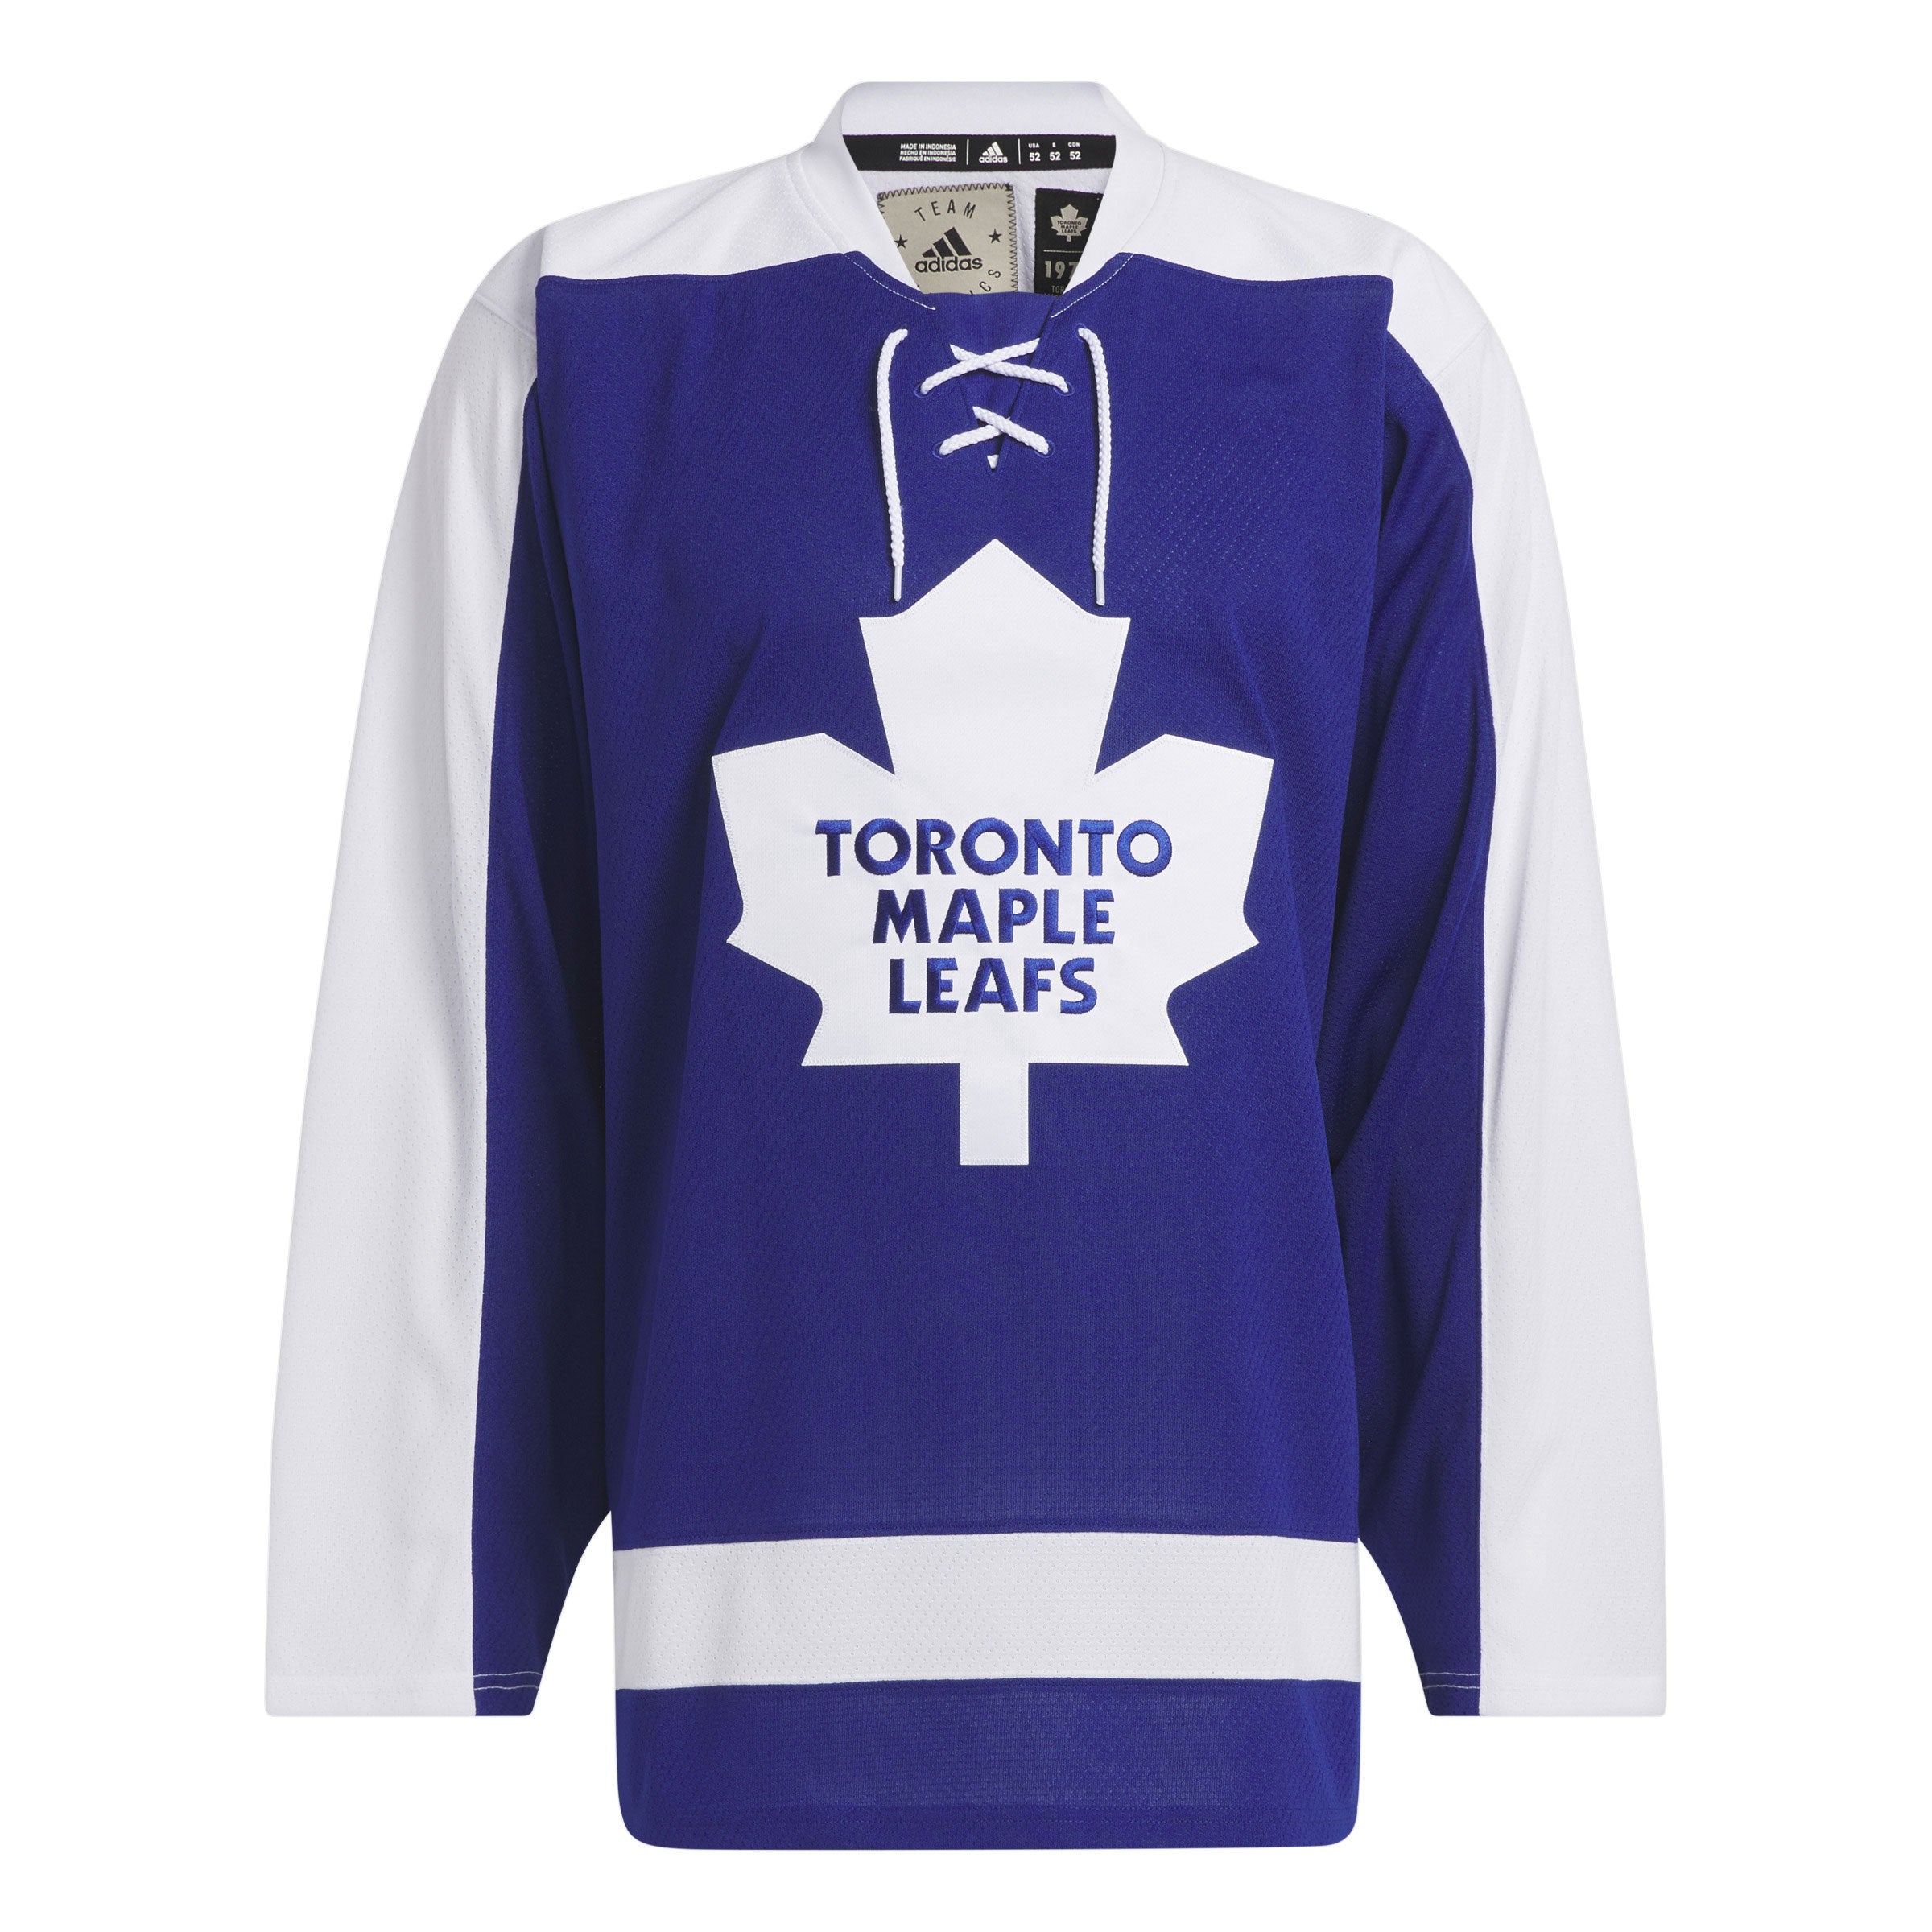 Vintage Toronto Maple Leafs Jersey  Clothes design, Toronto maple, Toronto  maple leafs